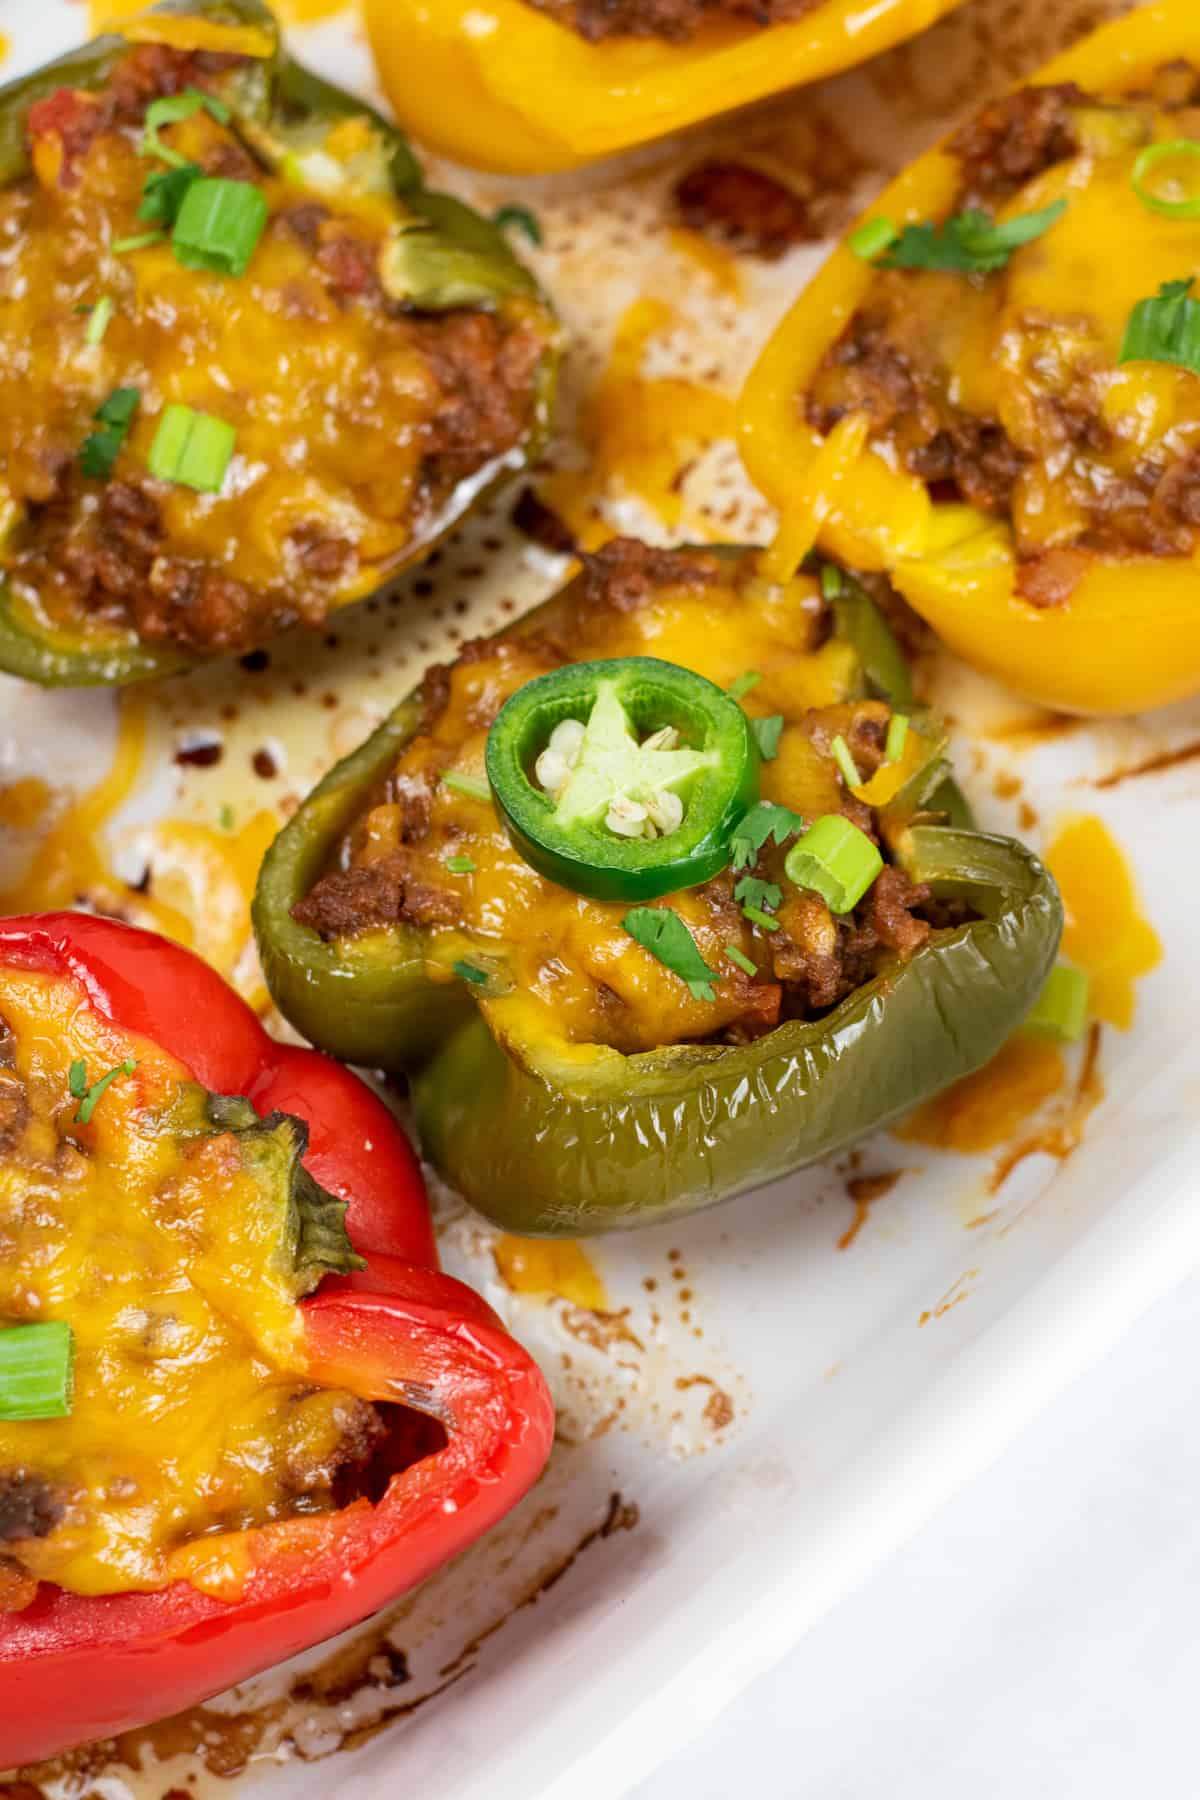 Taco stuffed peppers after baking.